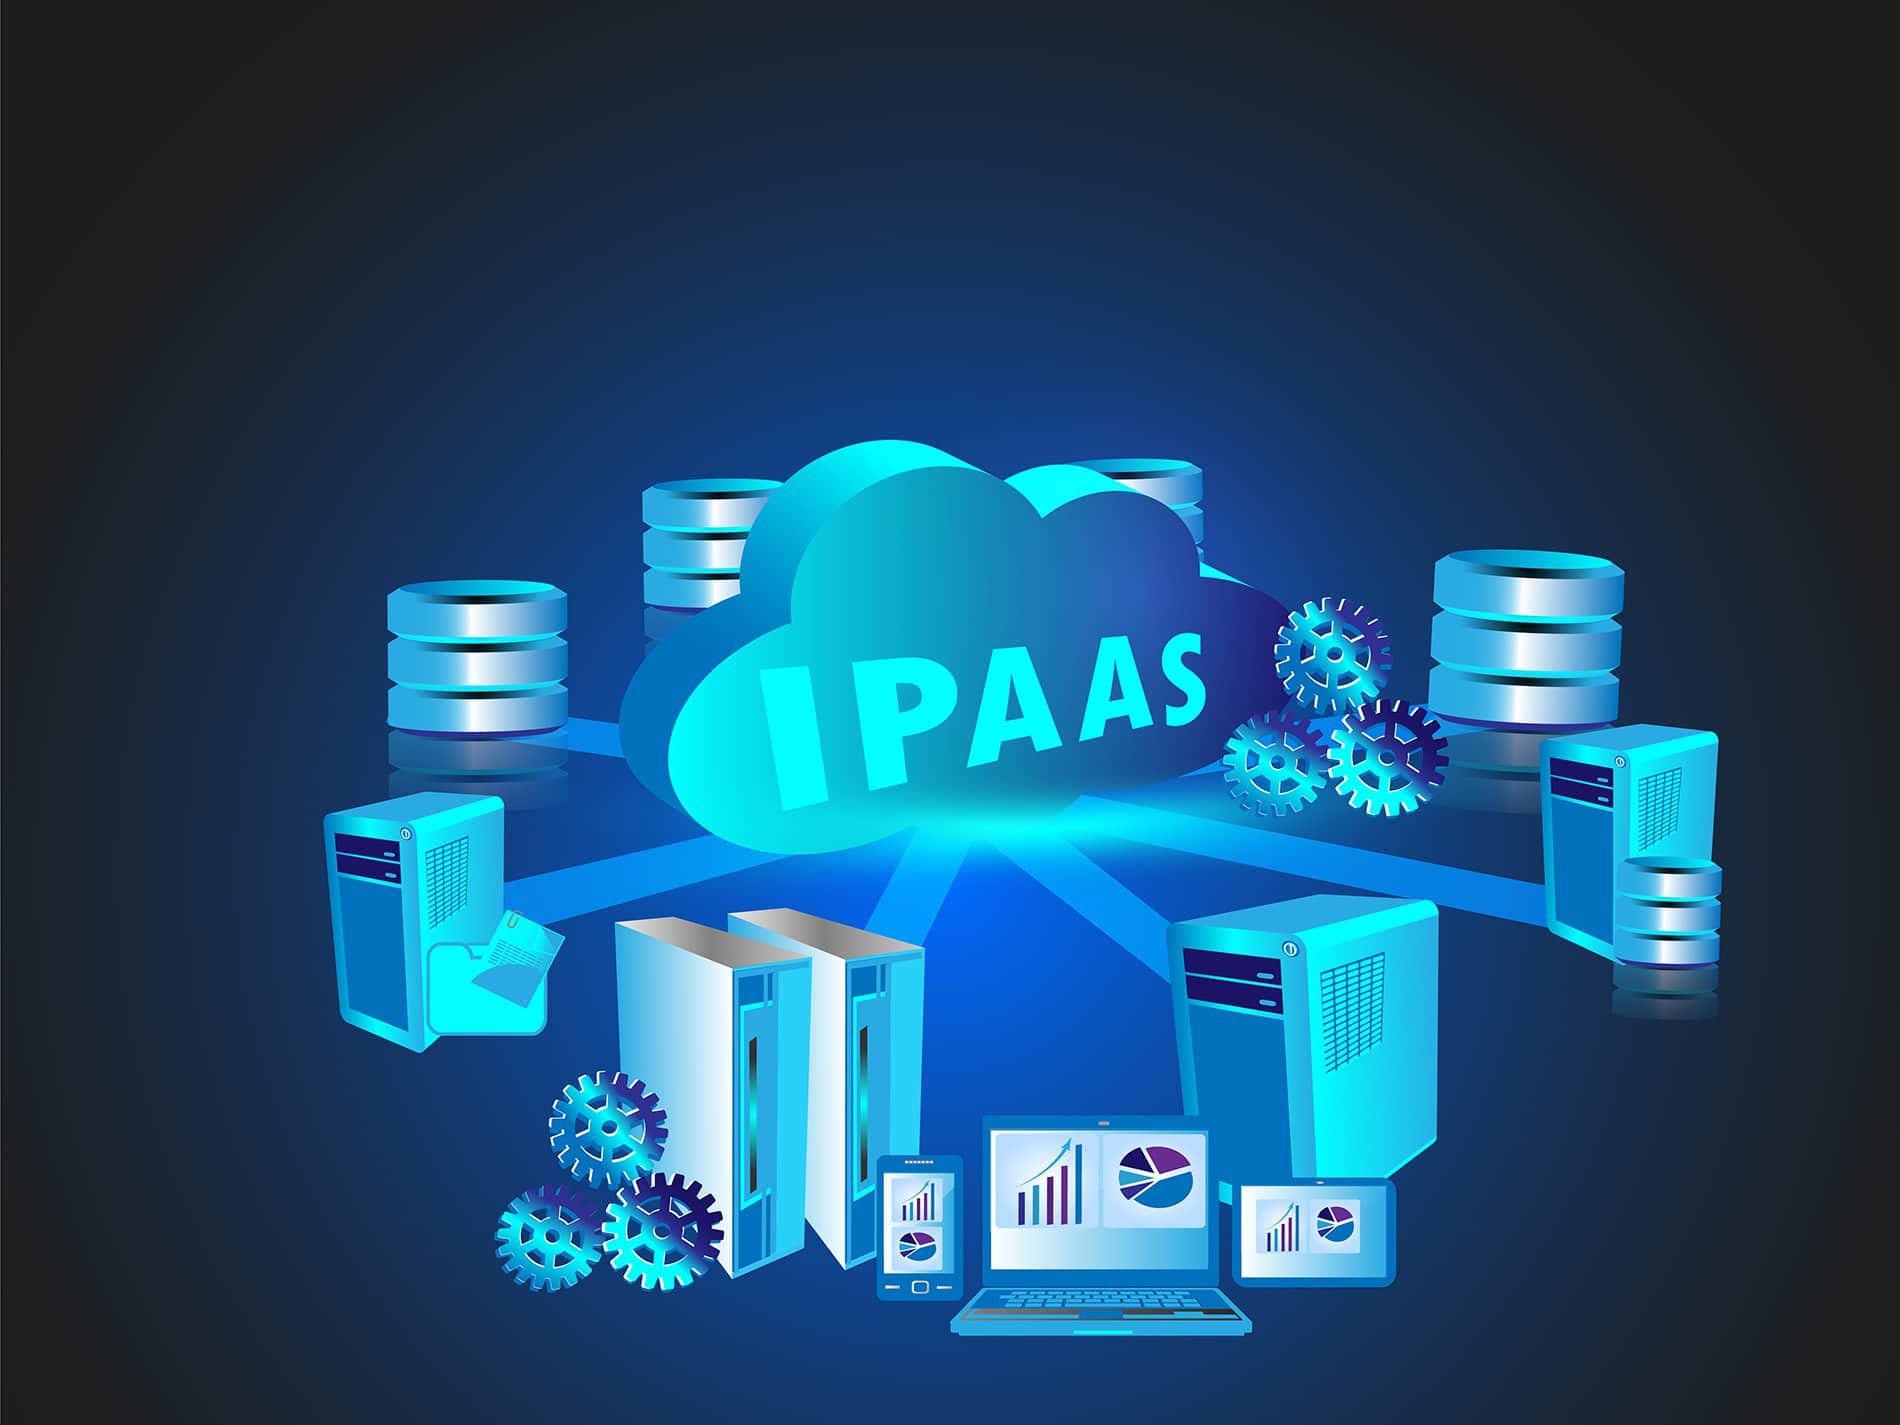 iPaaS Integration and Automation